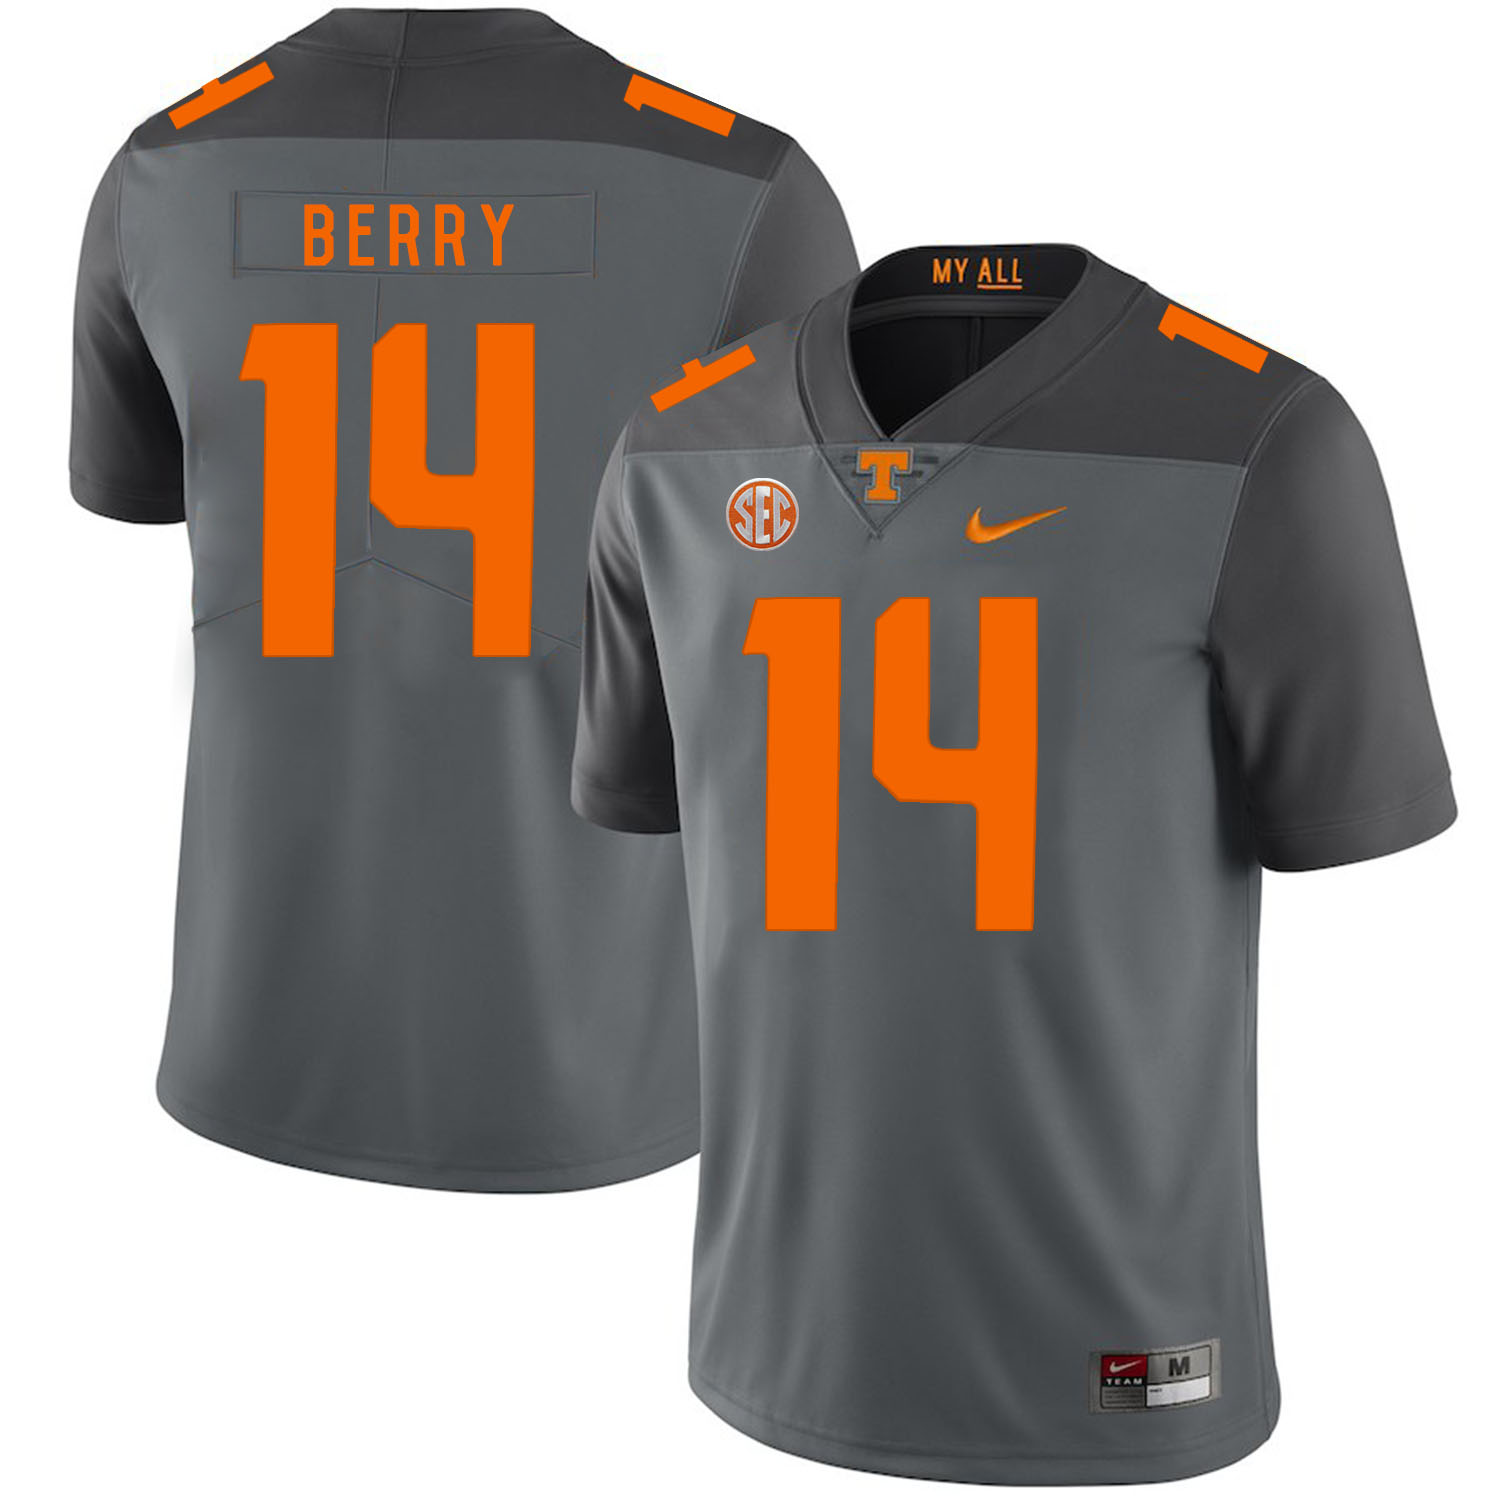 Tennessee Volunteers 14 Eric Berry Gray Nike College Football Jersey